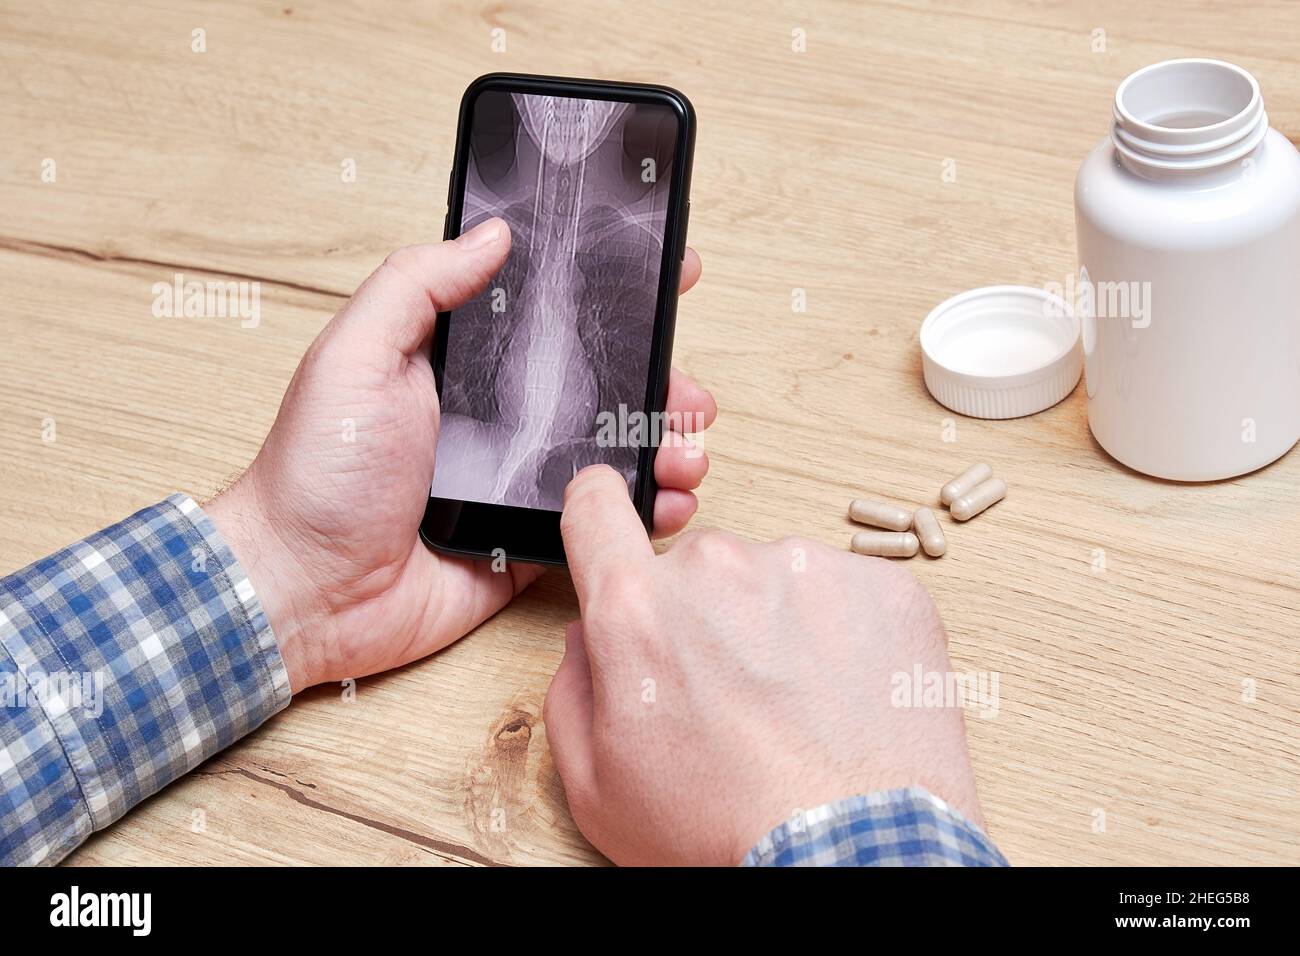 Old man analyzing his lungs CT scan on a phone. Pneumonia and disease diagnosis. Pills and medical bottles Stock Photo